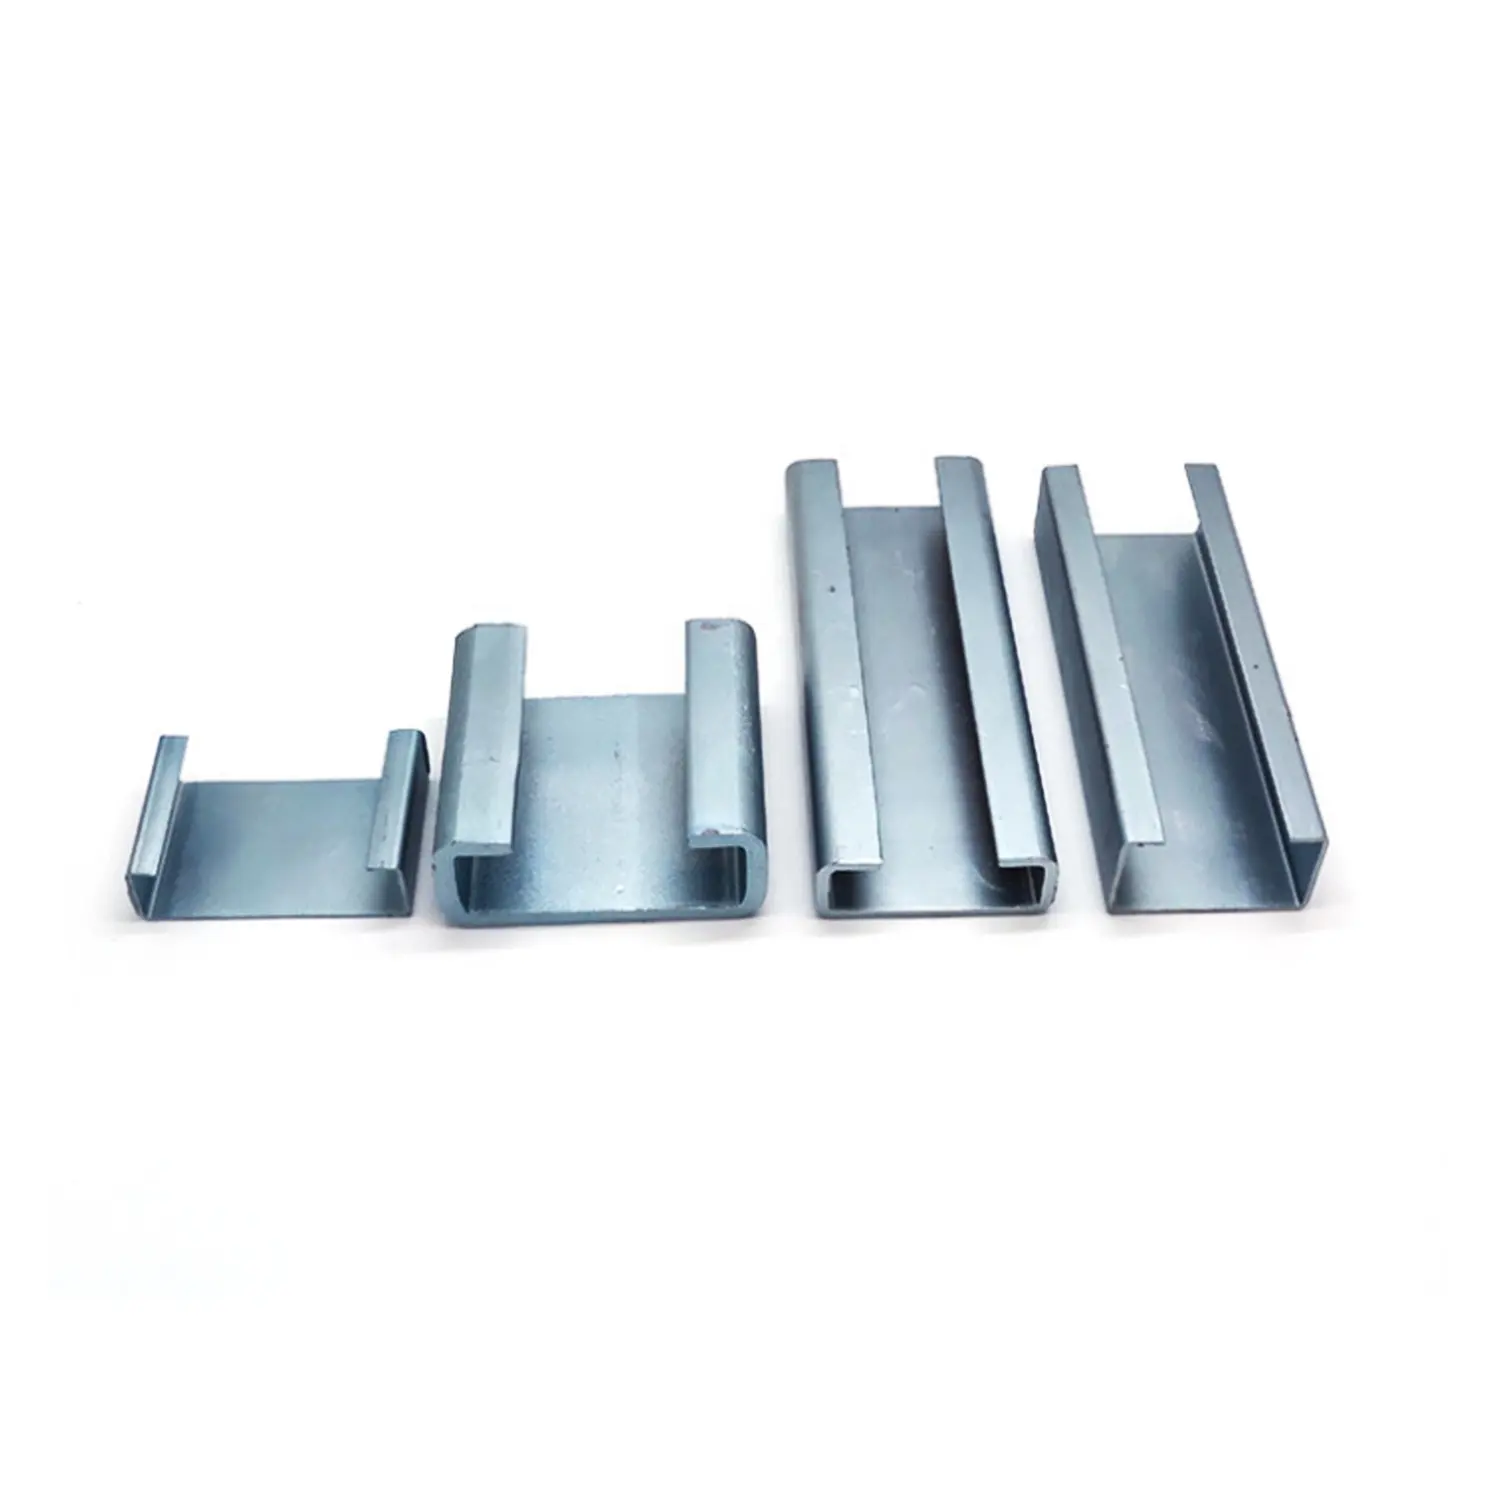 Hot Selling Galvanized C 4 Inch Steel Channel Custom Processing-Bending Cutting Welding for Construction Projects